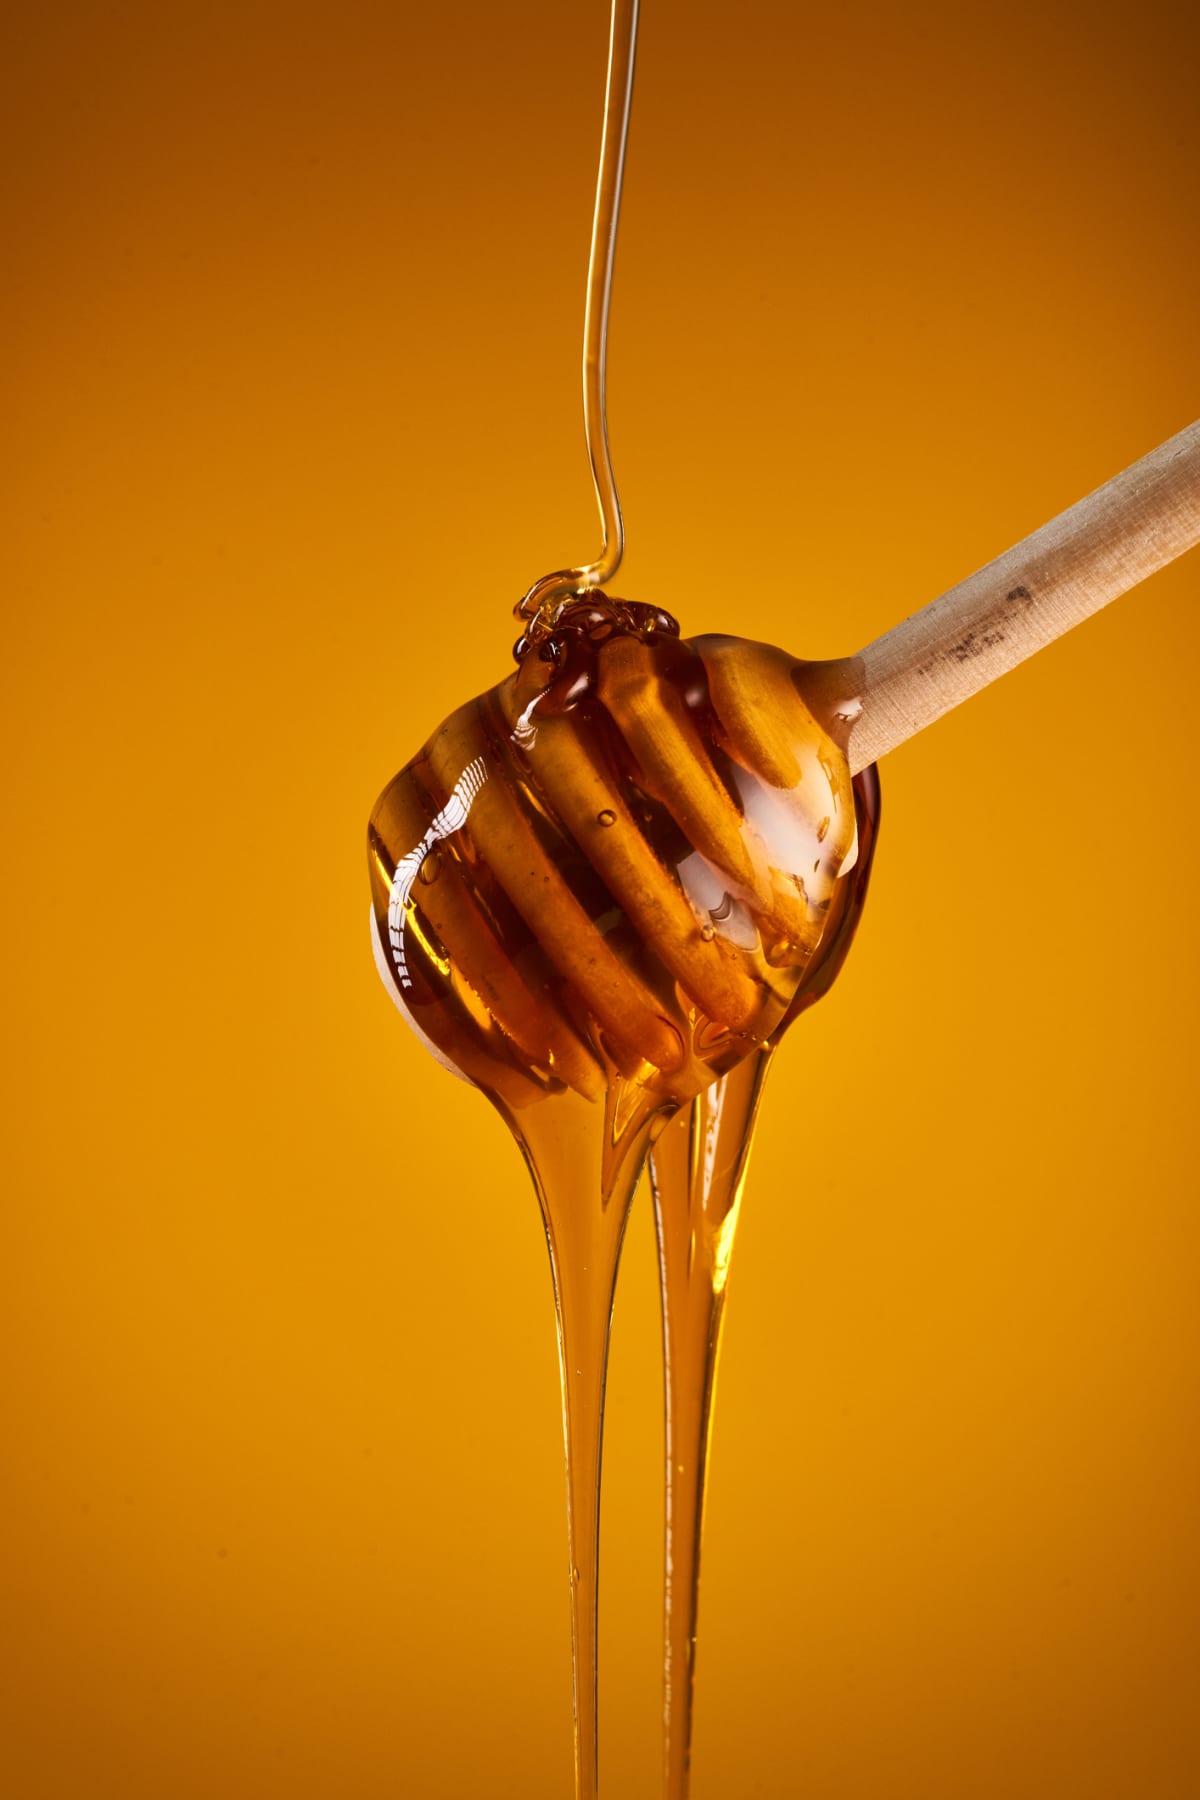 Closeup of honey dripping off a wooden dipper, isolated on yellow background